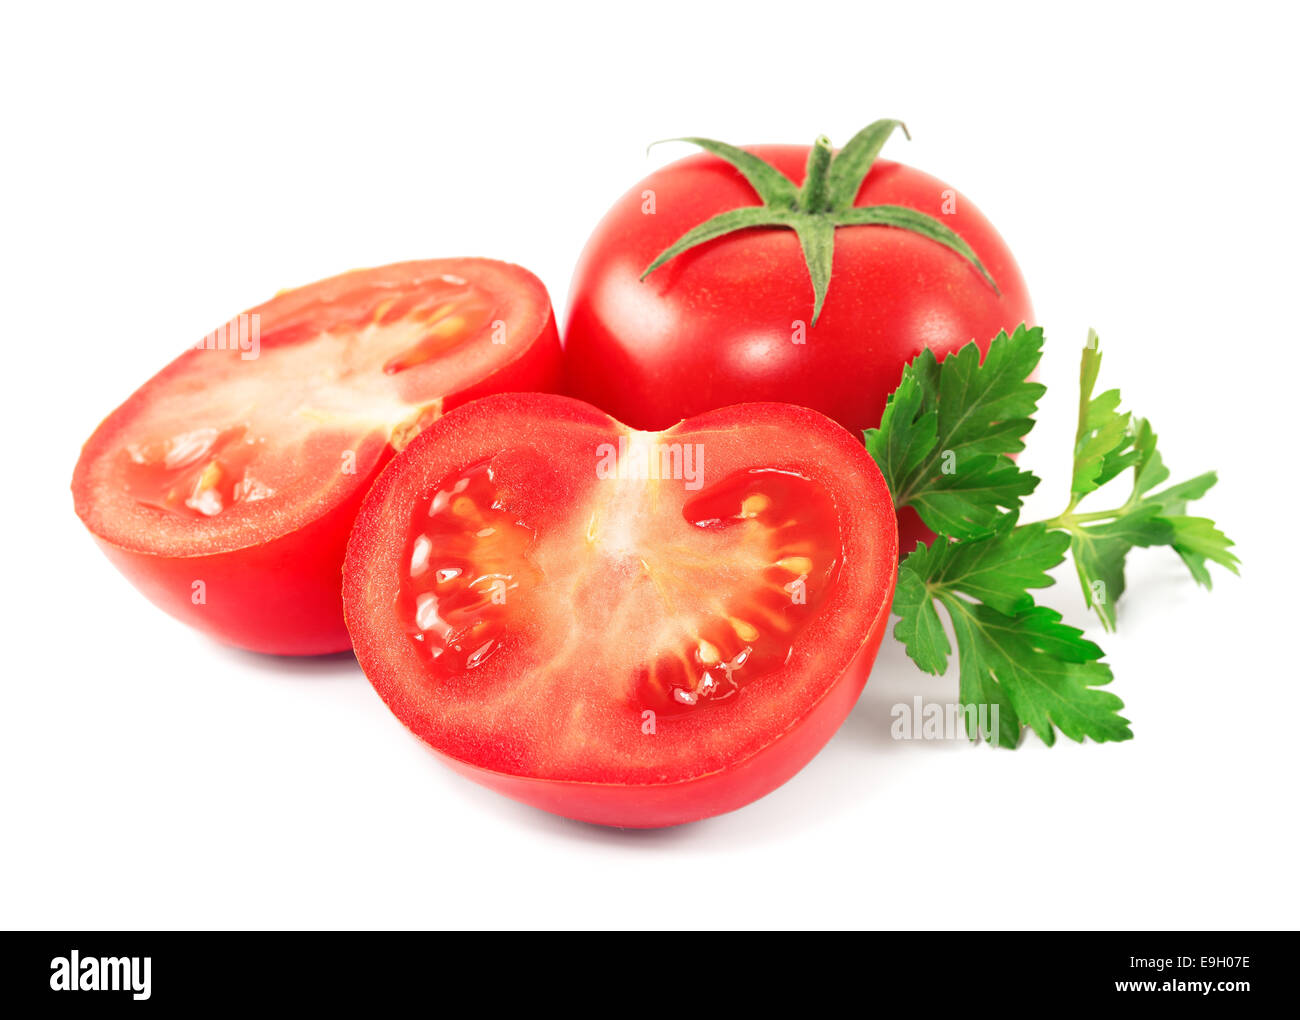 Red tomatoes with parsley leaves on a white background Stock Photo